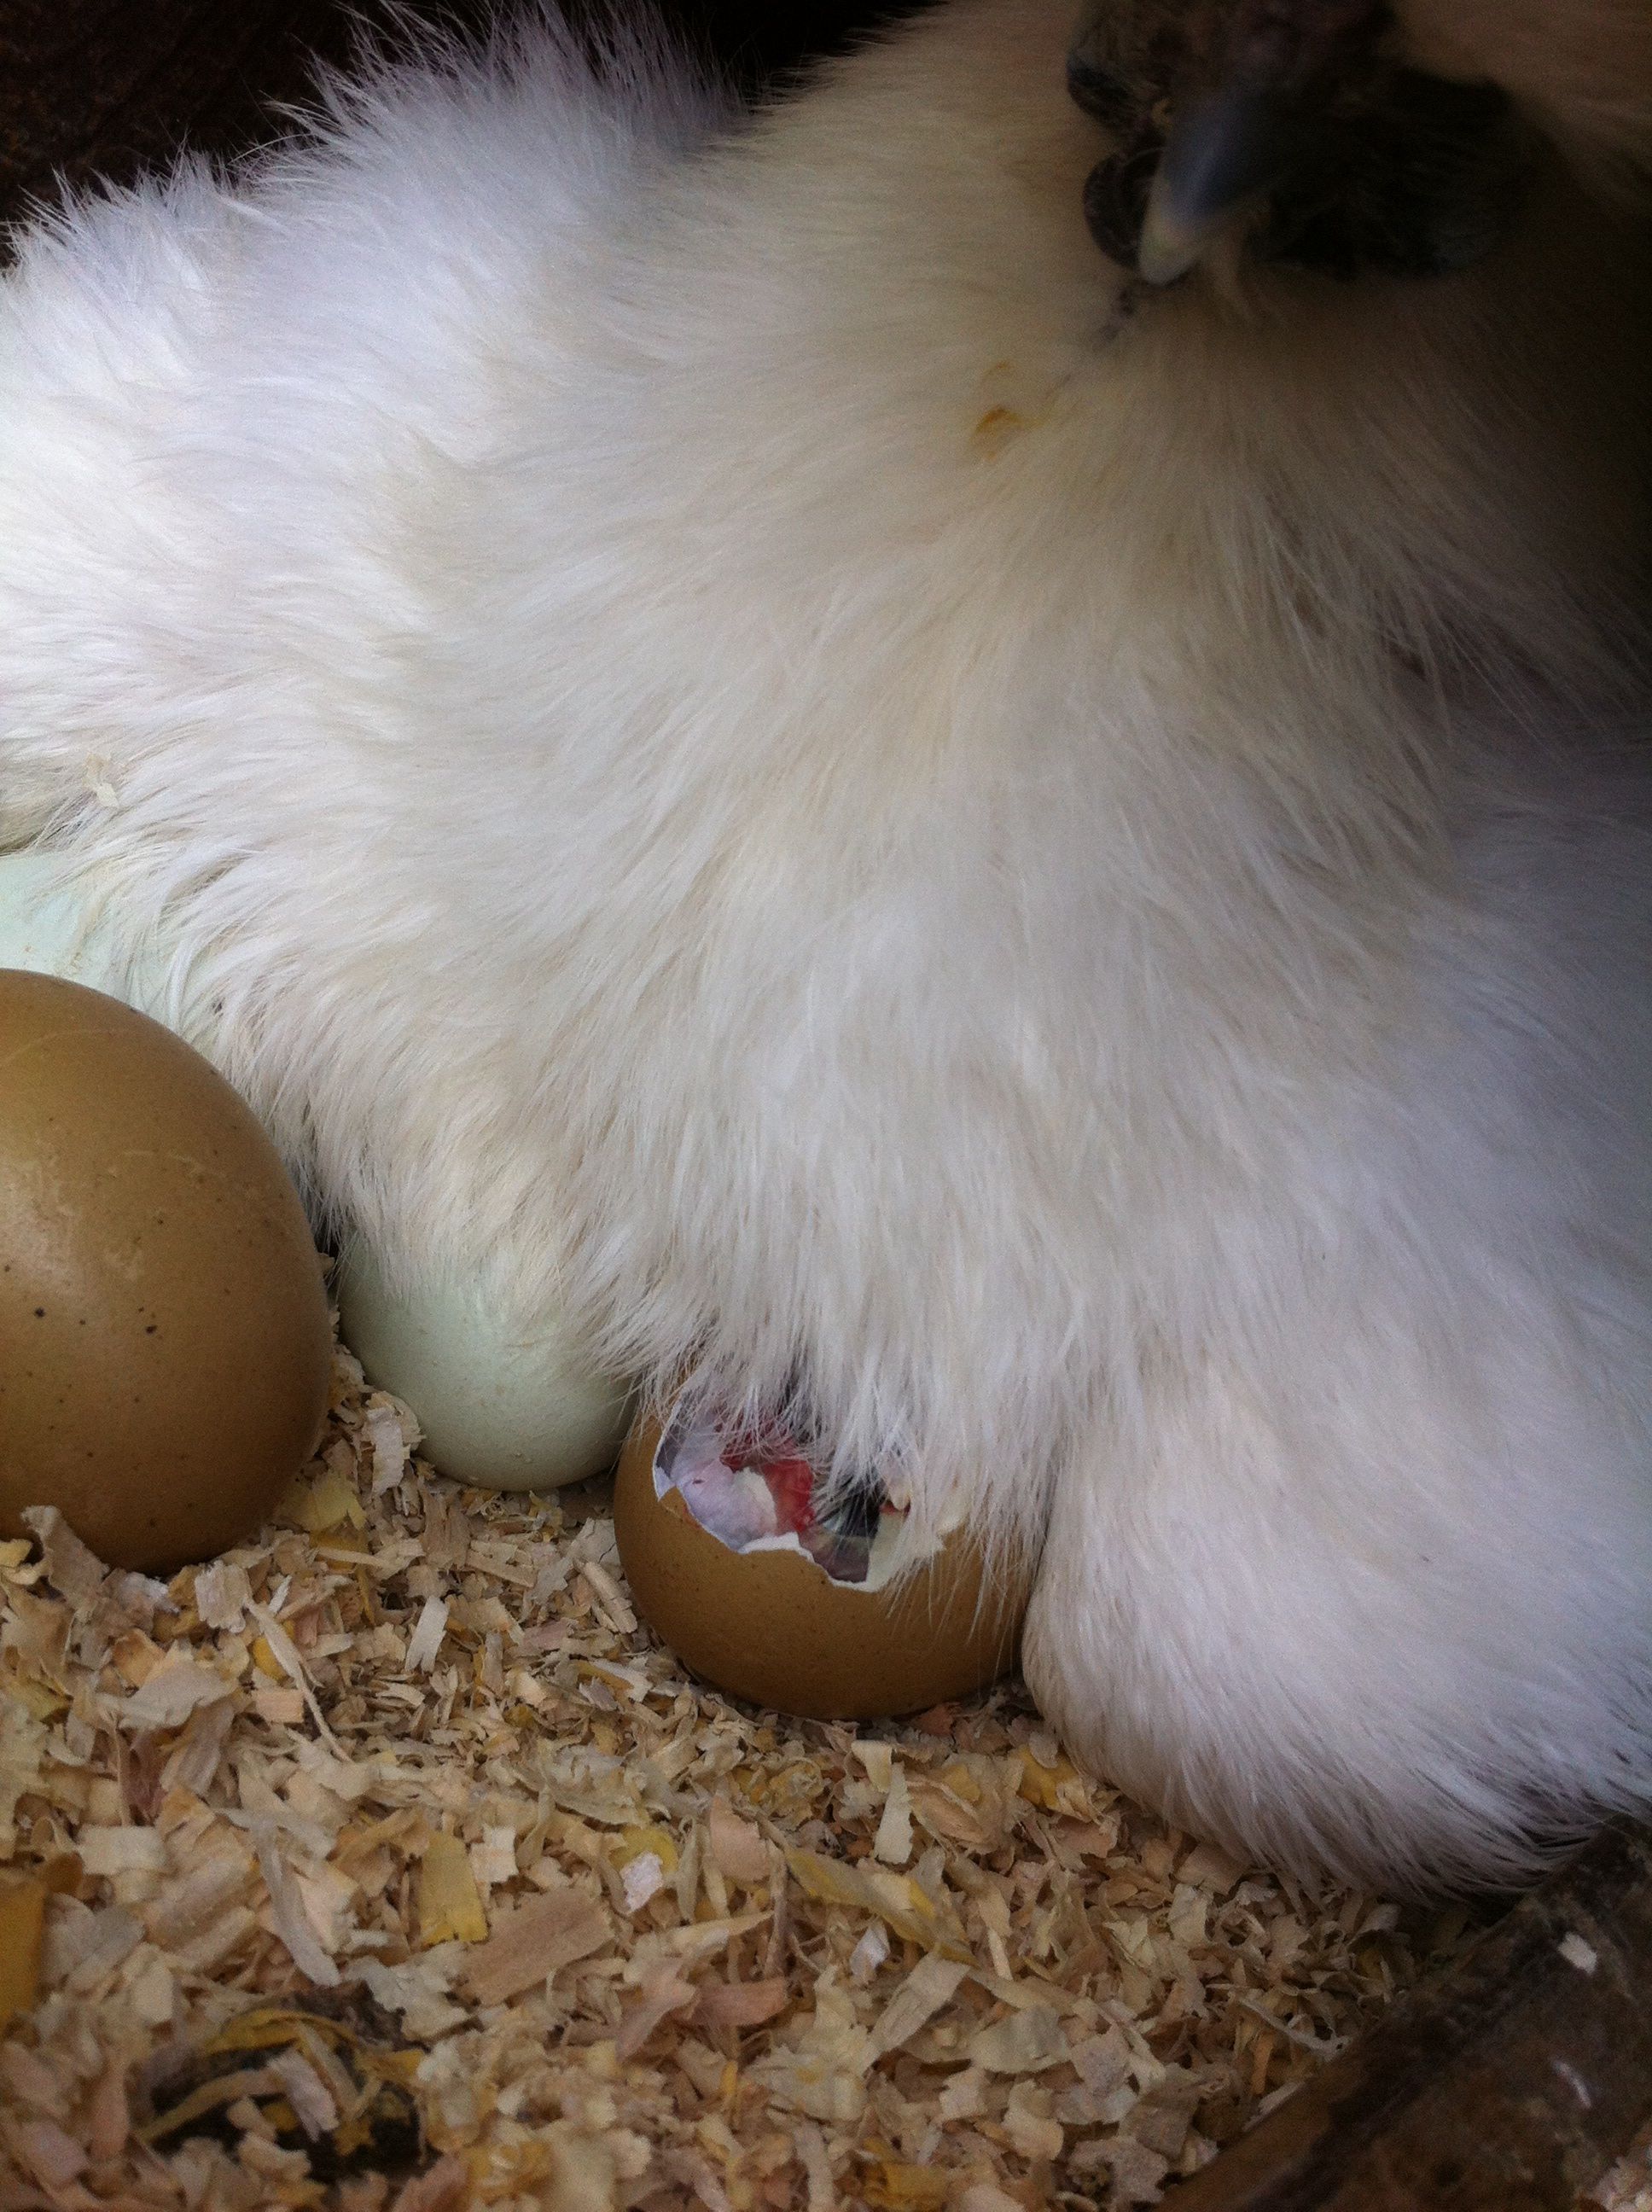 #3 chick is hatching